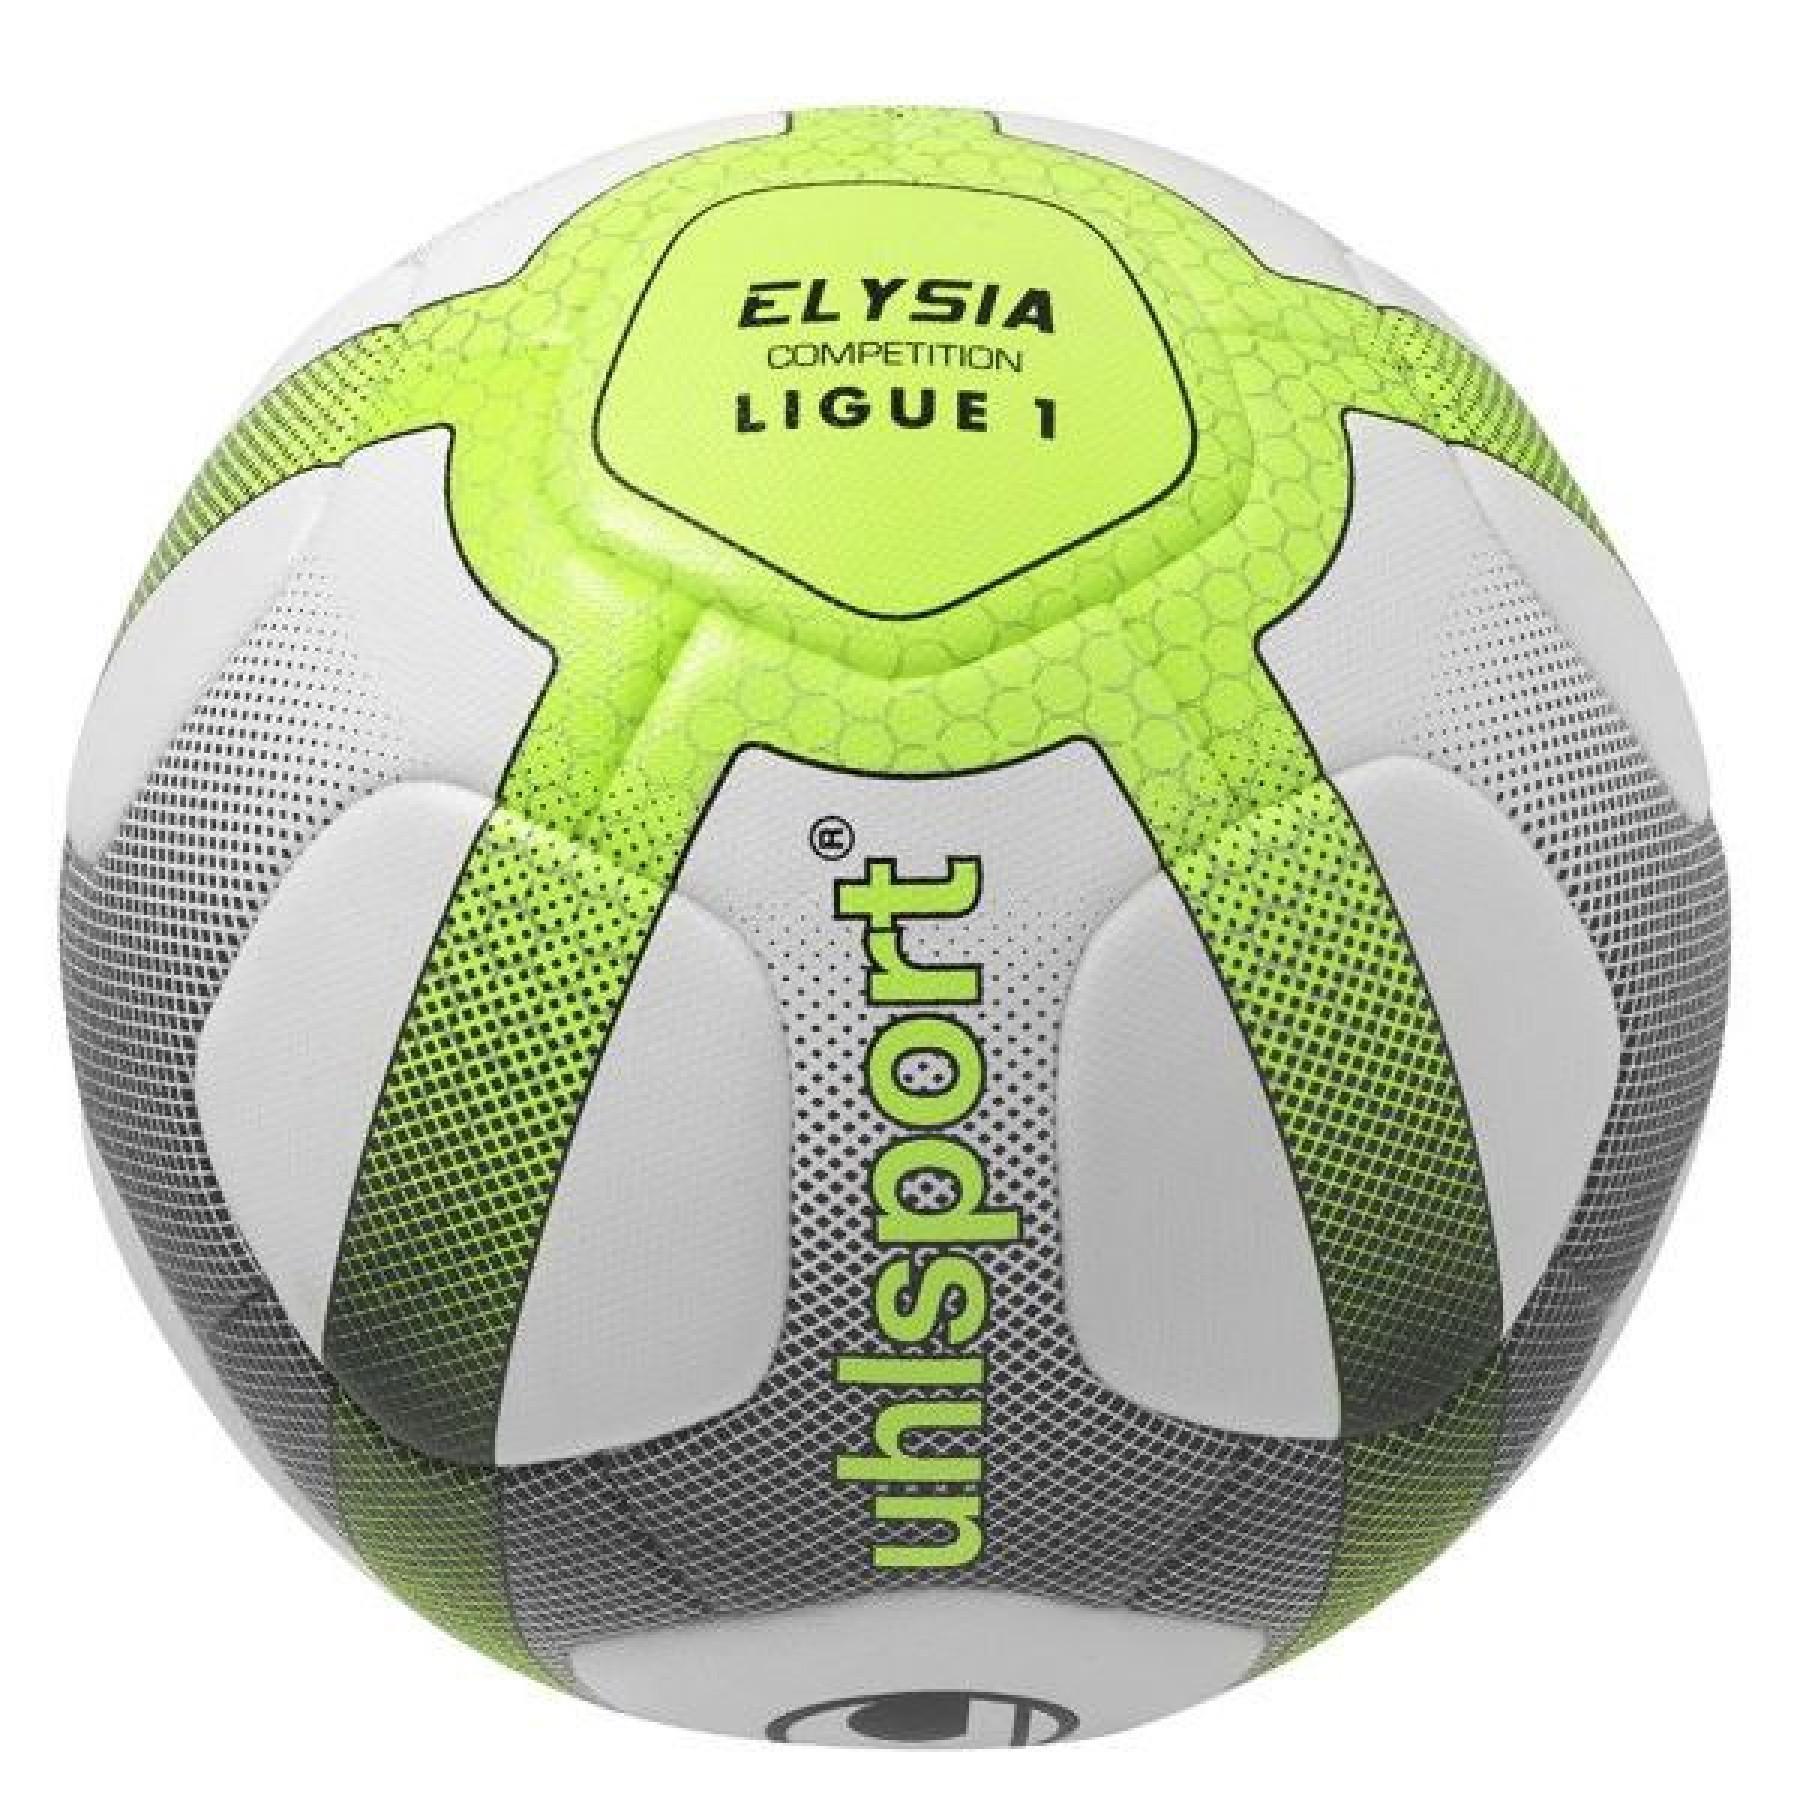 Balloon Uhlsport Ligue 1 Competition Elysia